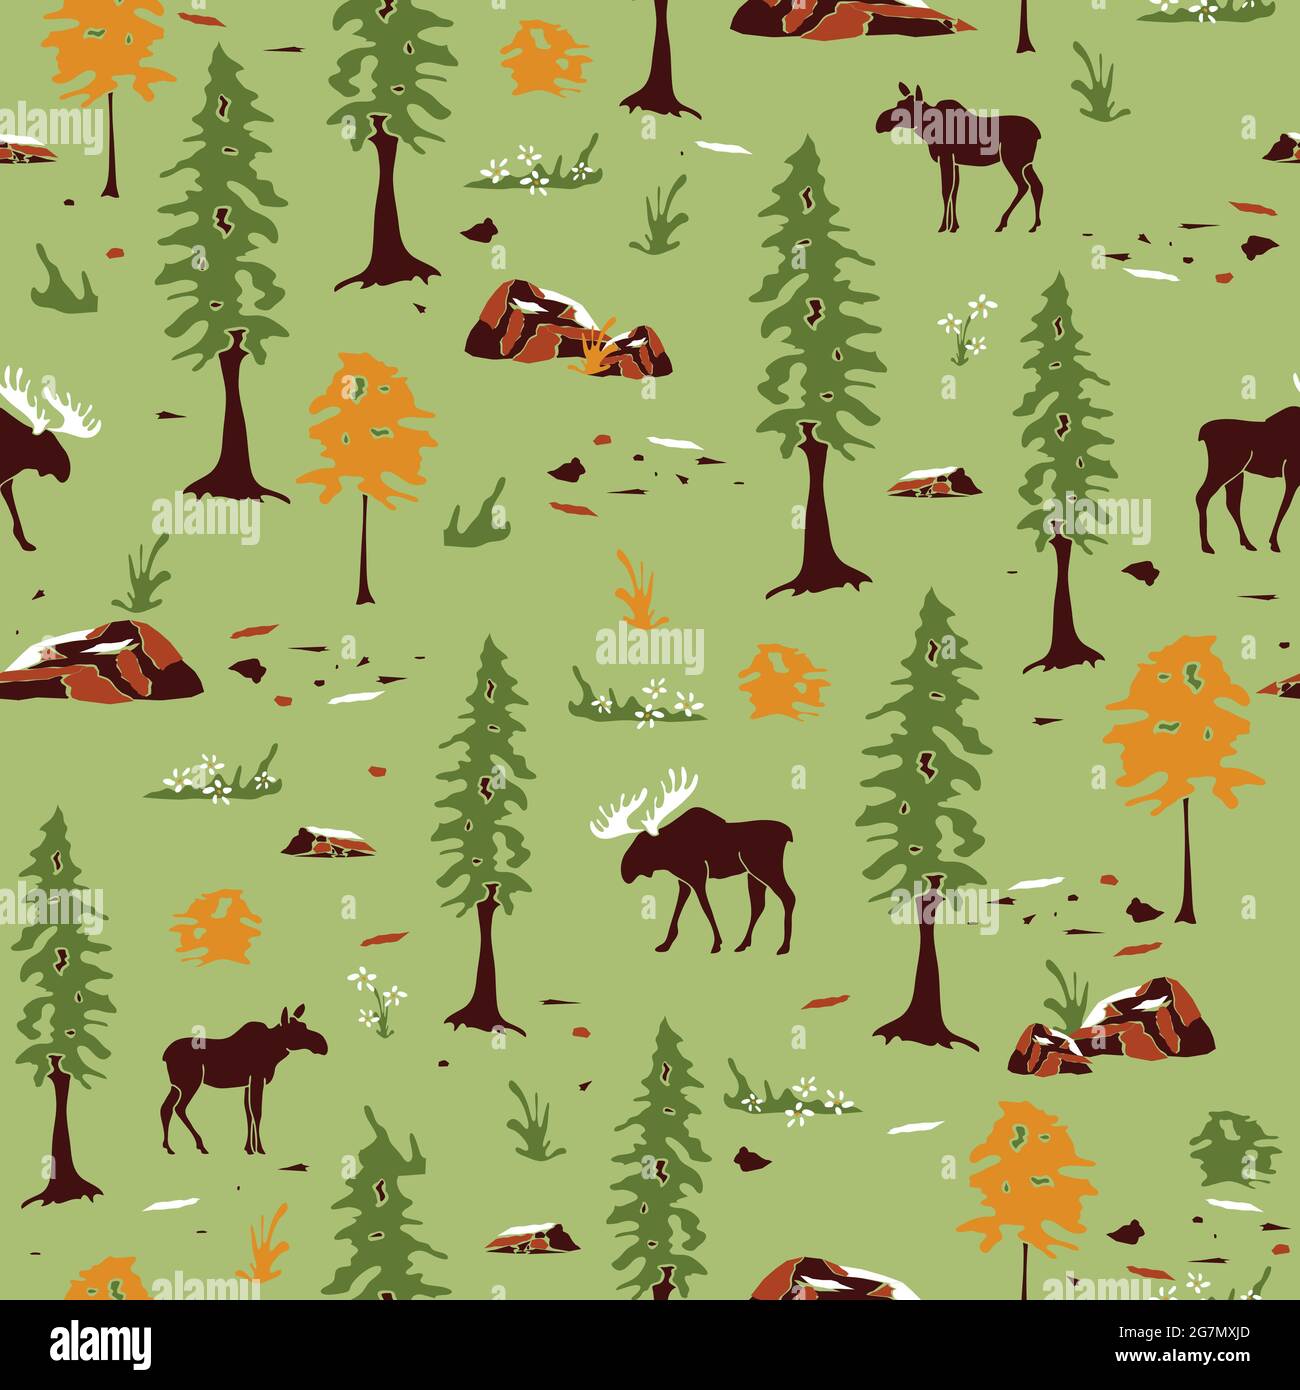 Seamless vector pattern with moose landscape on light green background. Canadian forest wallpaper design. Animal fabric fashion. Stock Vector